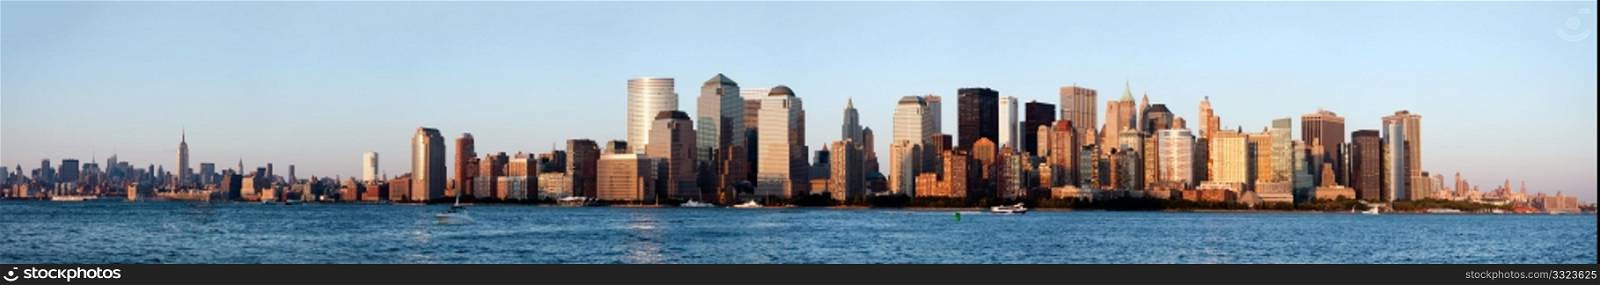 Panorama of New York City Manhattan skyline showing downtown financial district with world trade center WTC and midtown with Empire State building.